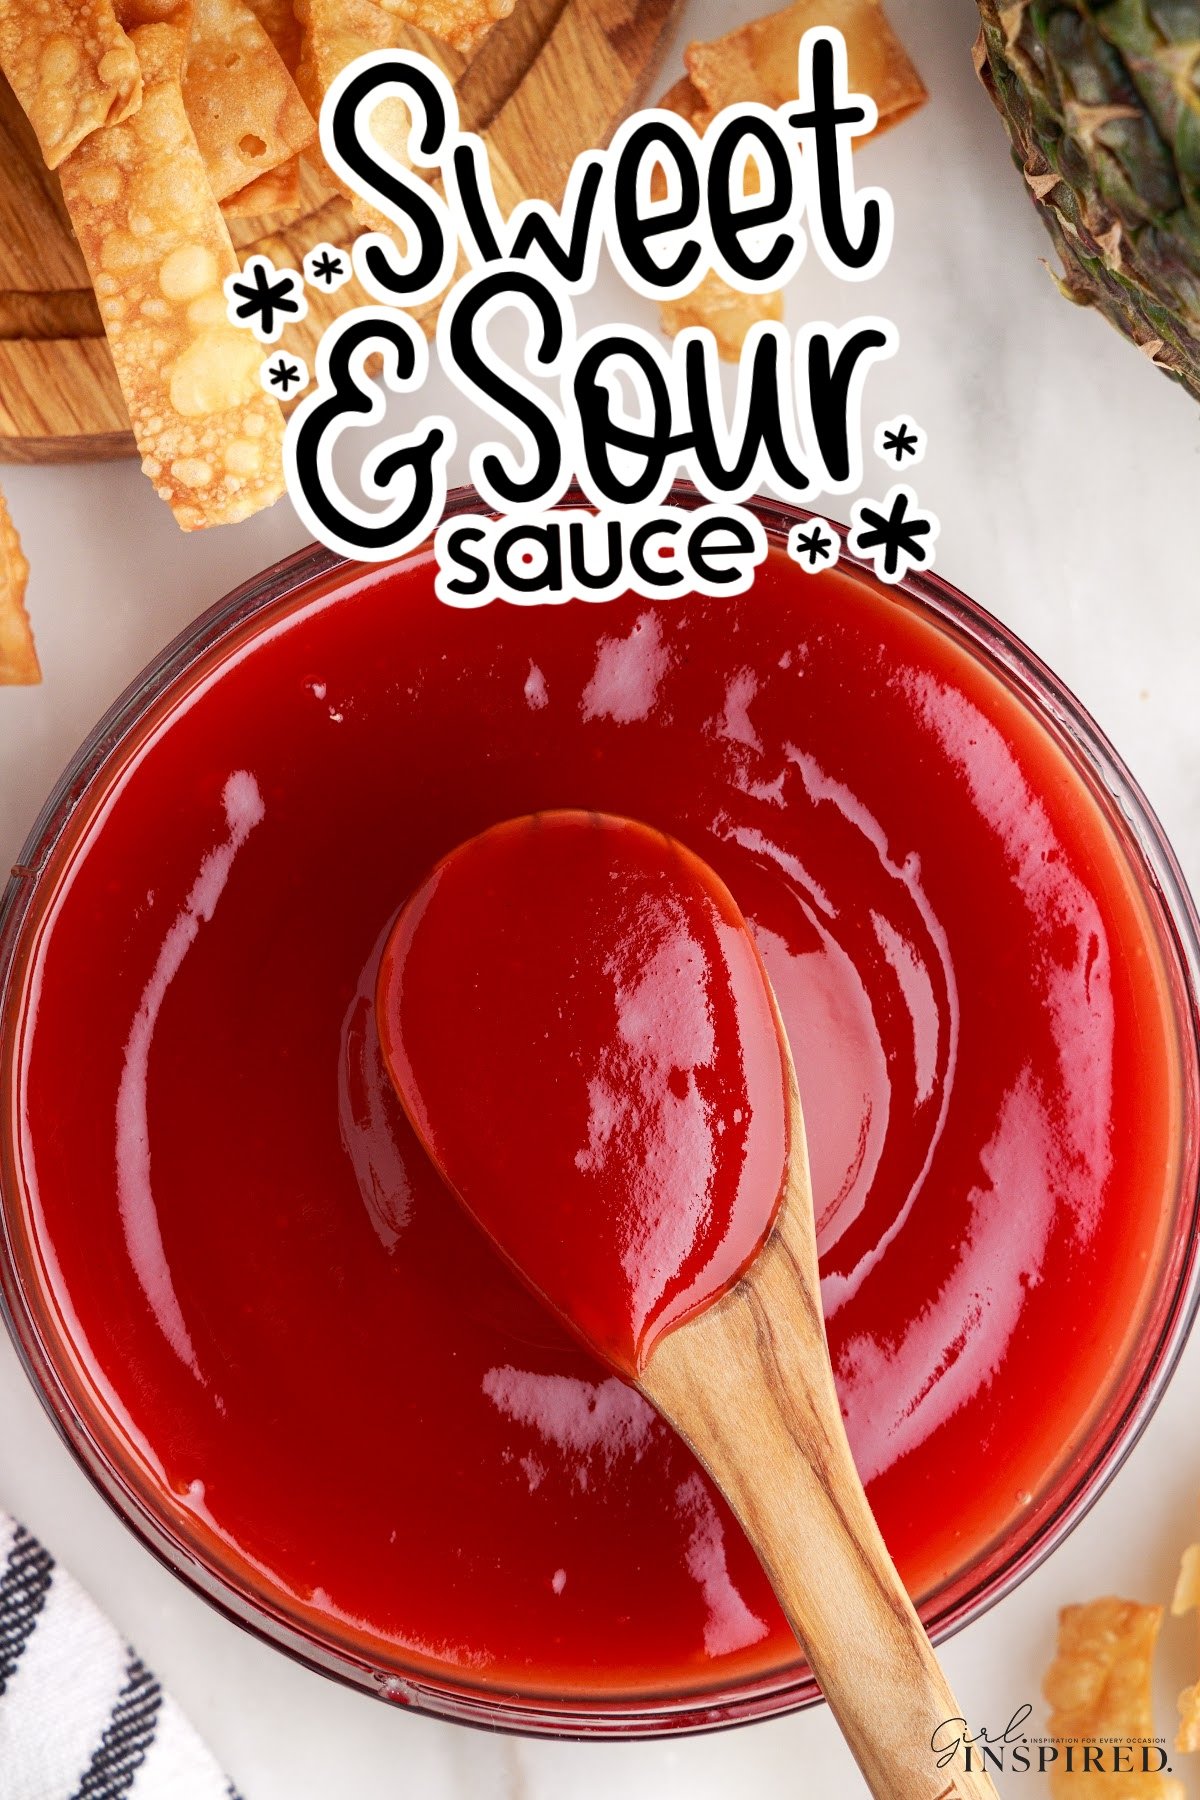 Bowl of Sweet and Sour Sauce, with a spoon scooping some out, with text overlay.